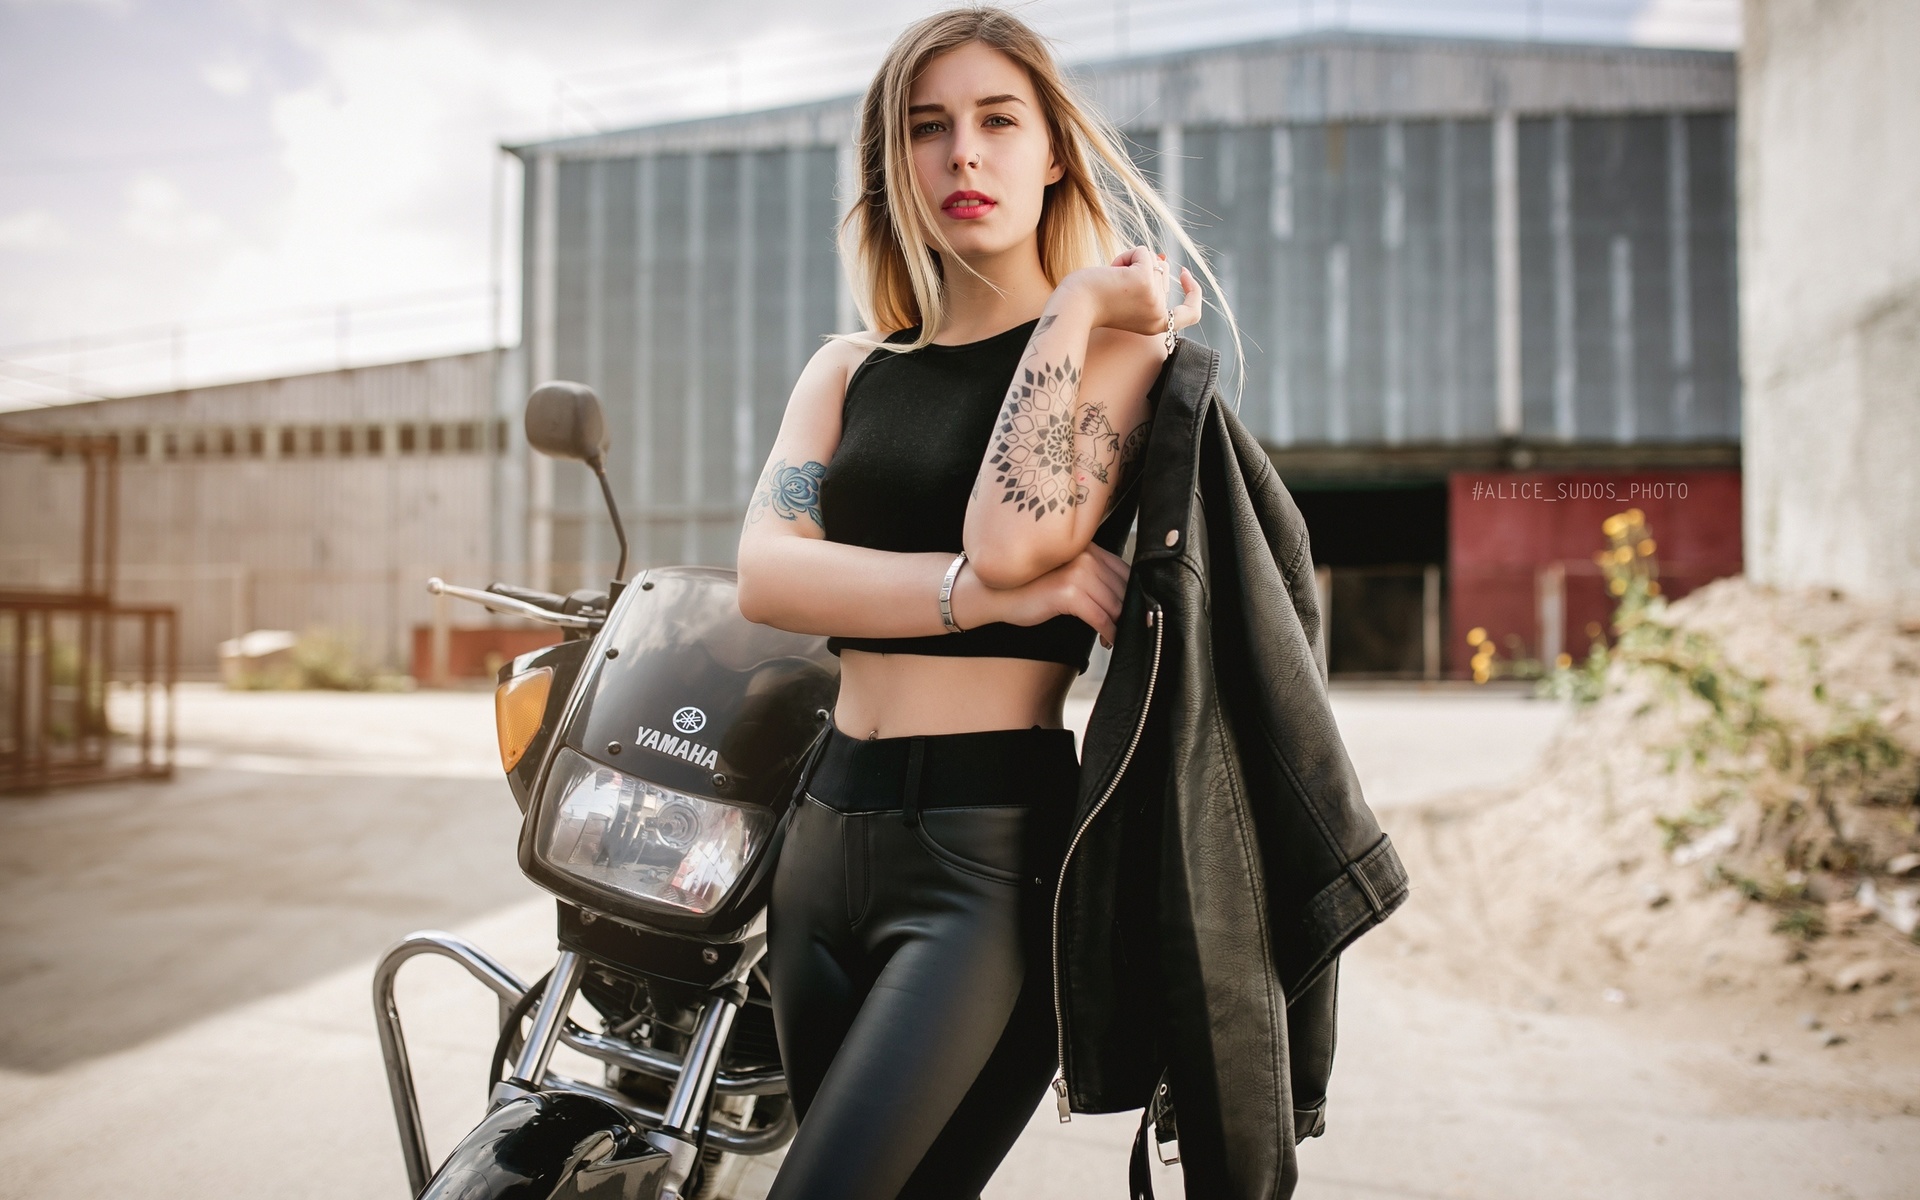 women, blonde, black clothing, tattoo, portrait, women with motorcycles, women outdoors, belly, yamaha, nose ring, leather jackets